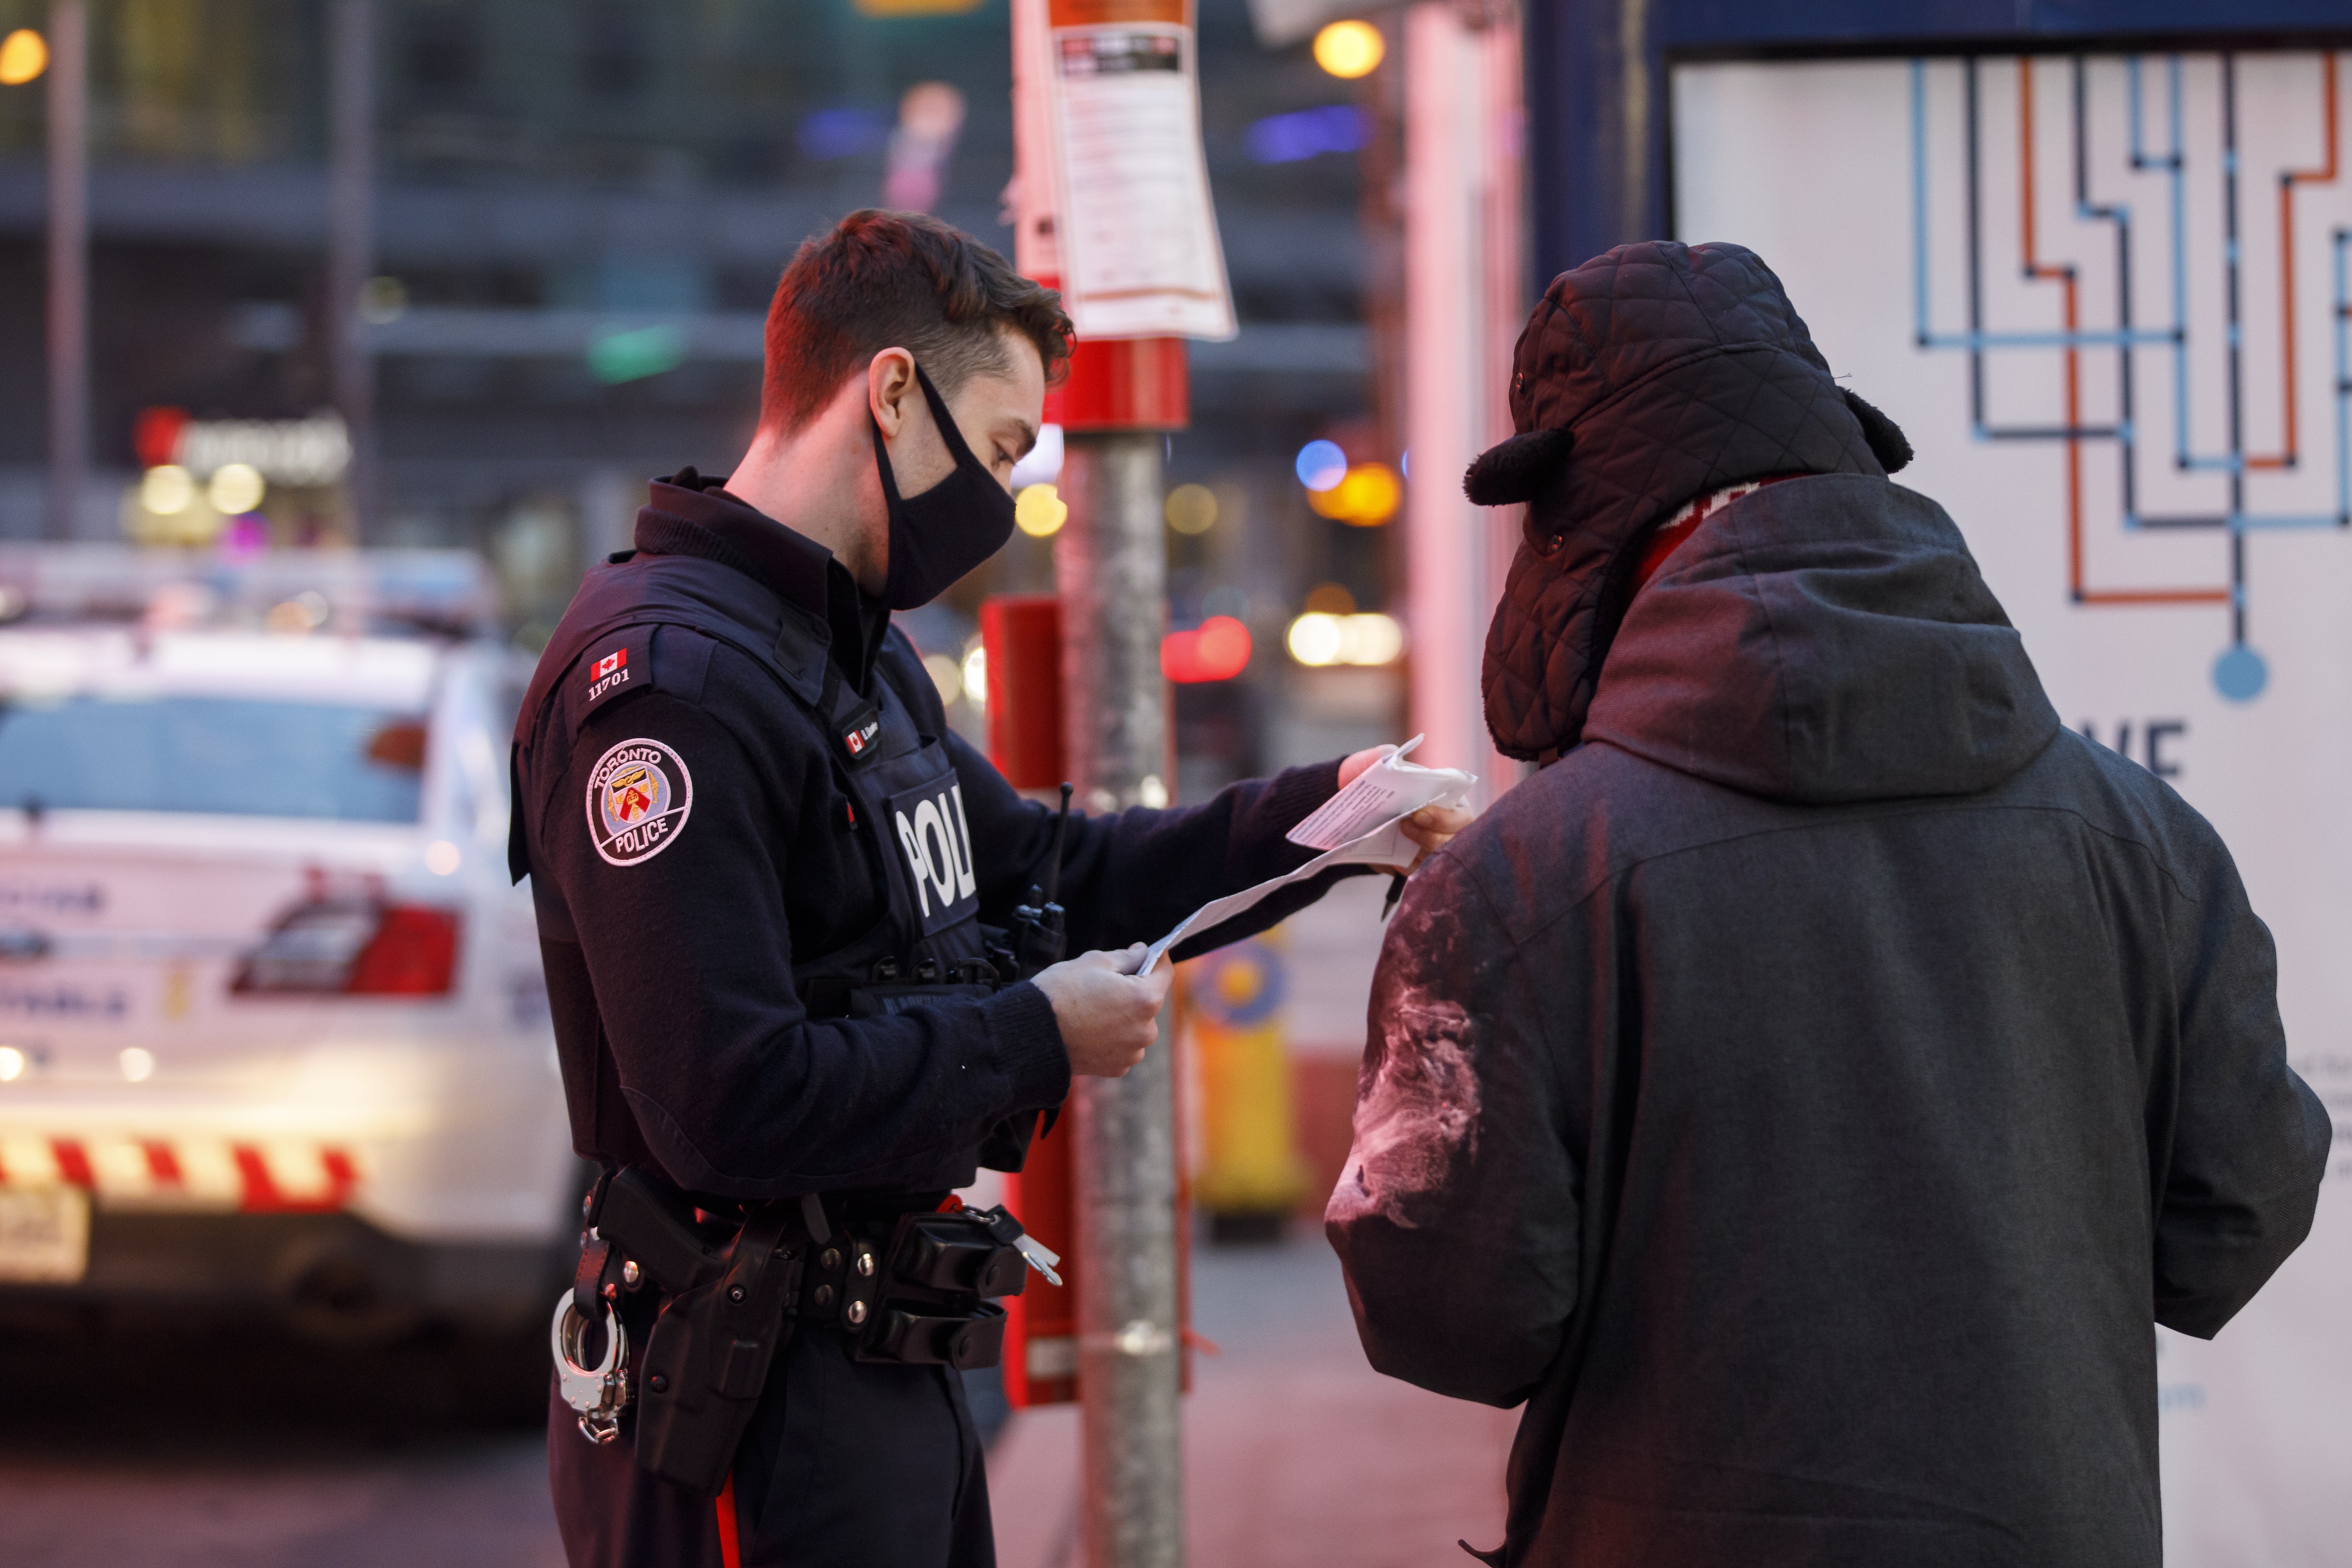 Calgary police say officer shook anti-masker's hand for agreeing